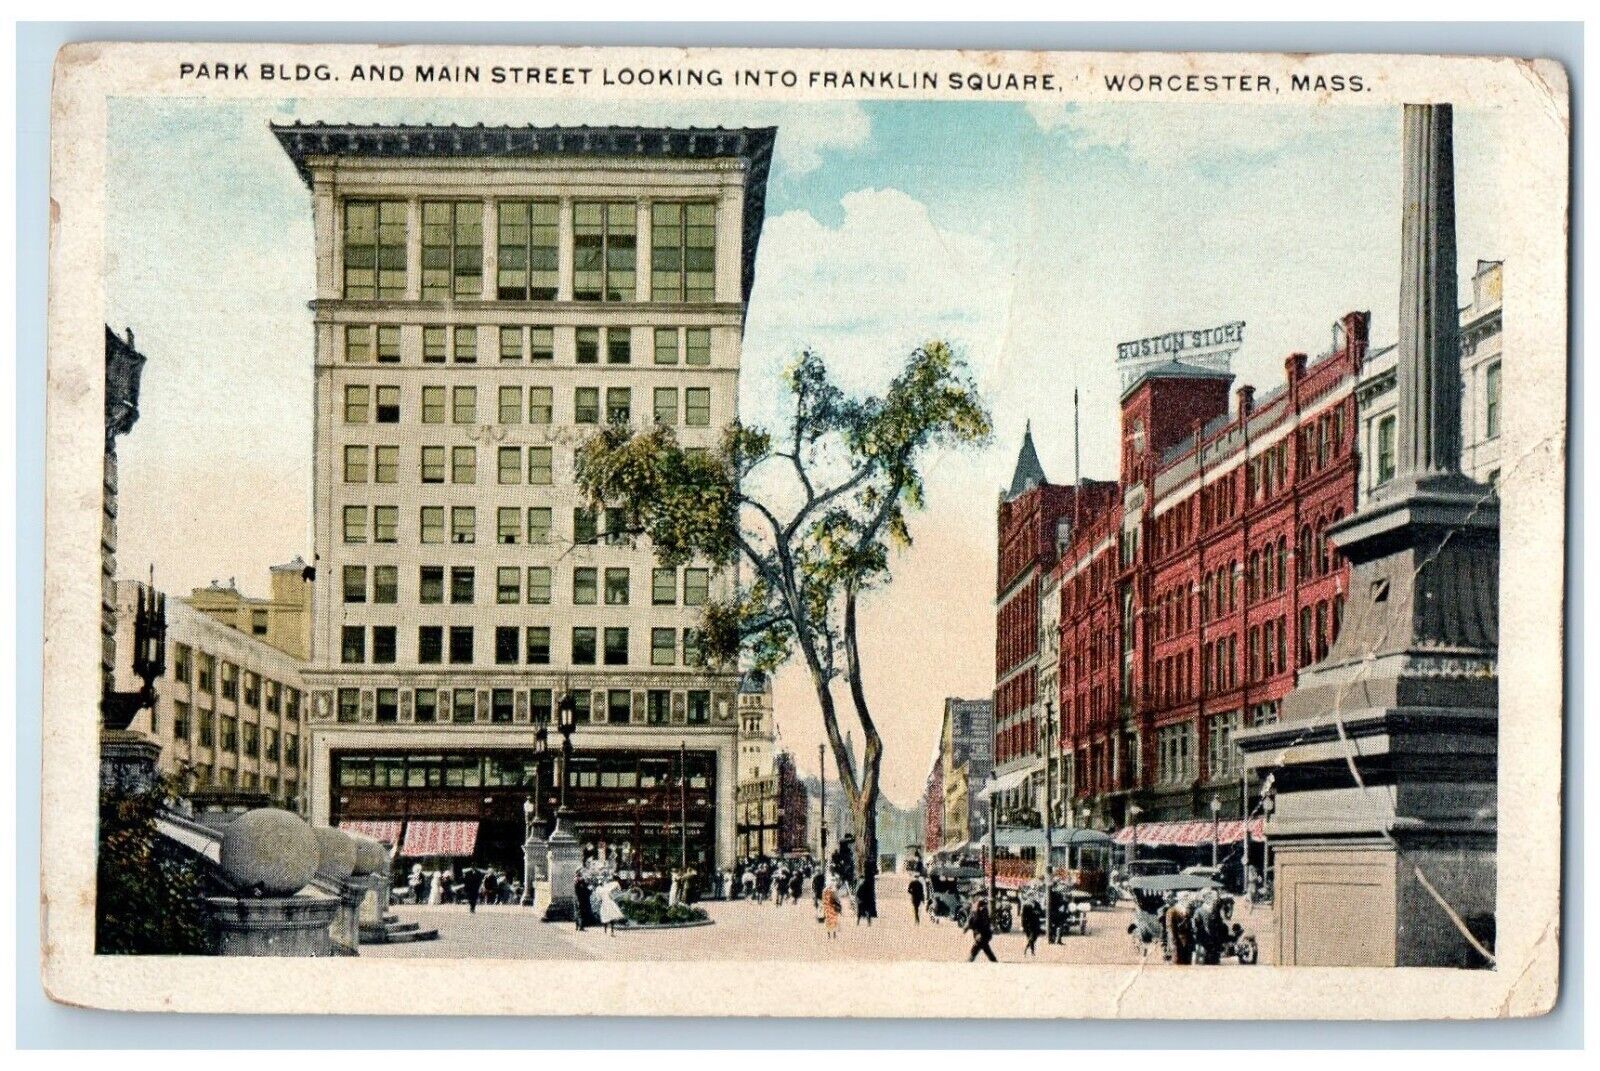 1920 Park Bldg. And Main Stret Looking Franklin Square Worcester MA Postcard